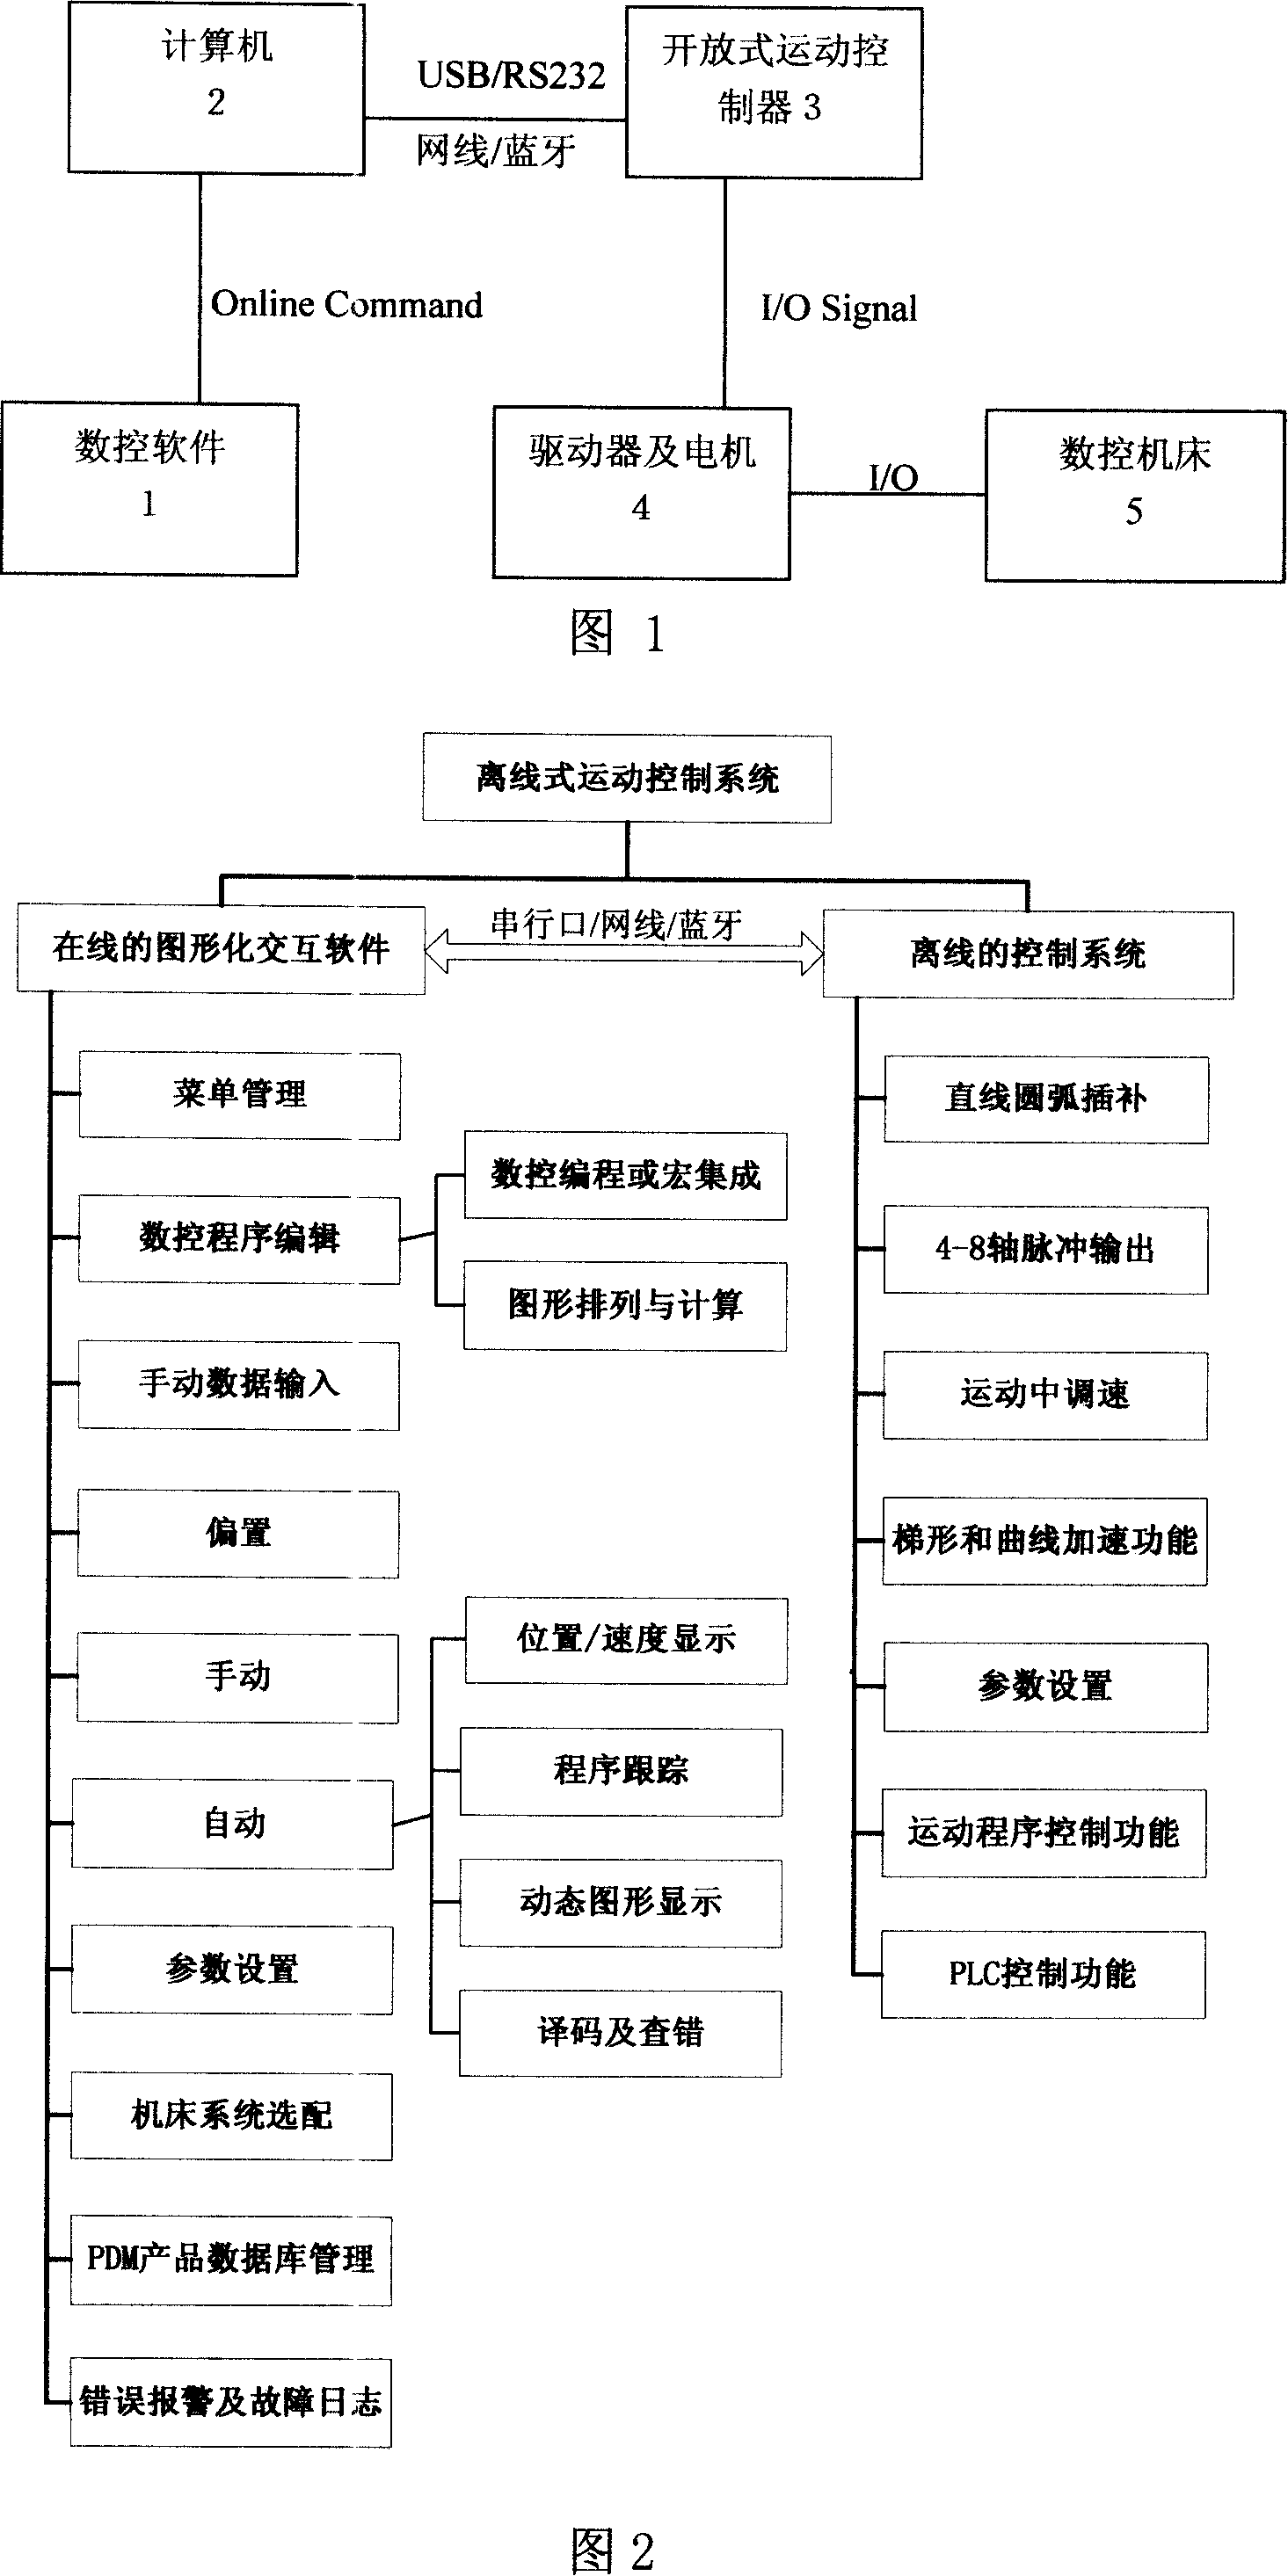 Digital control system controlled based on computer online or off line method, and operation method